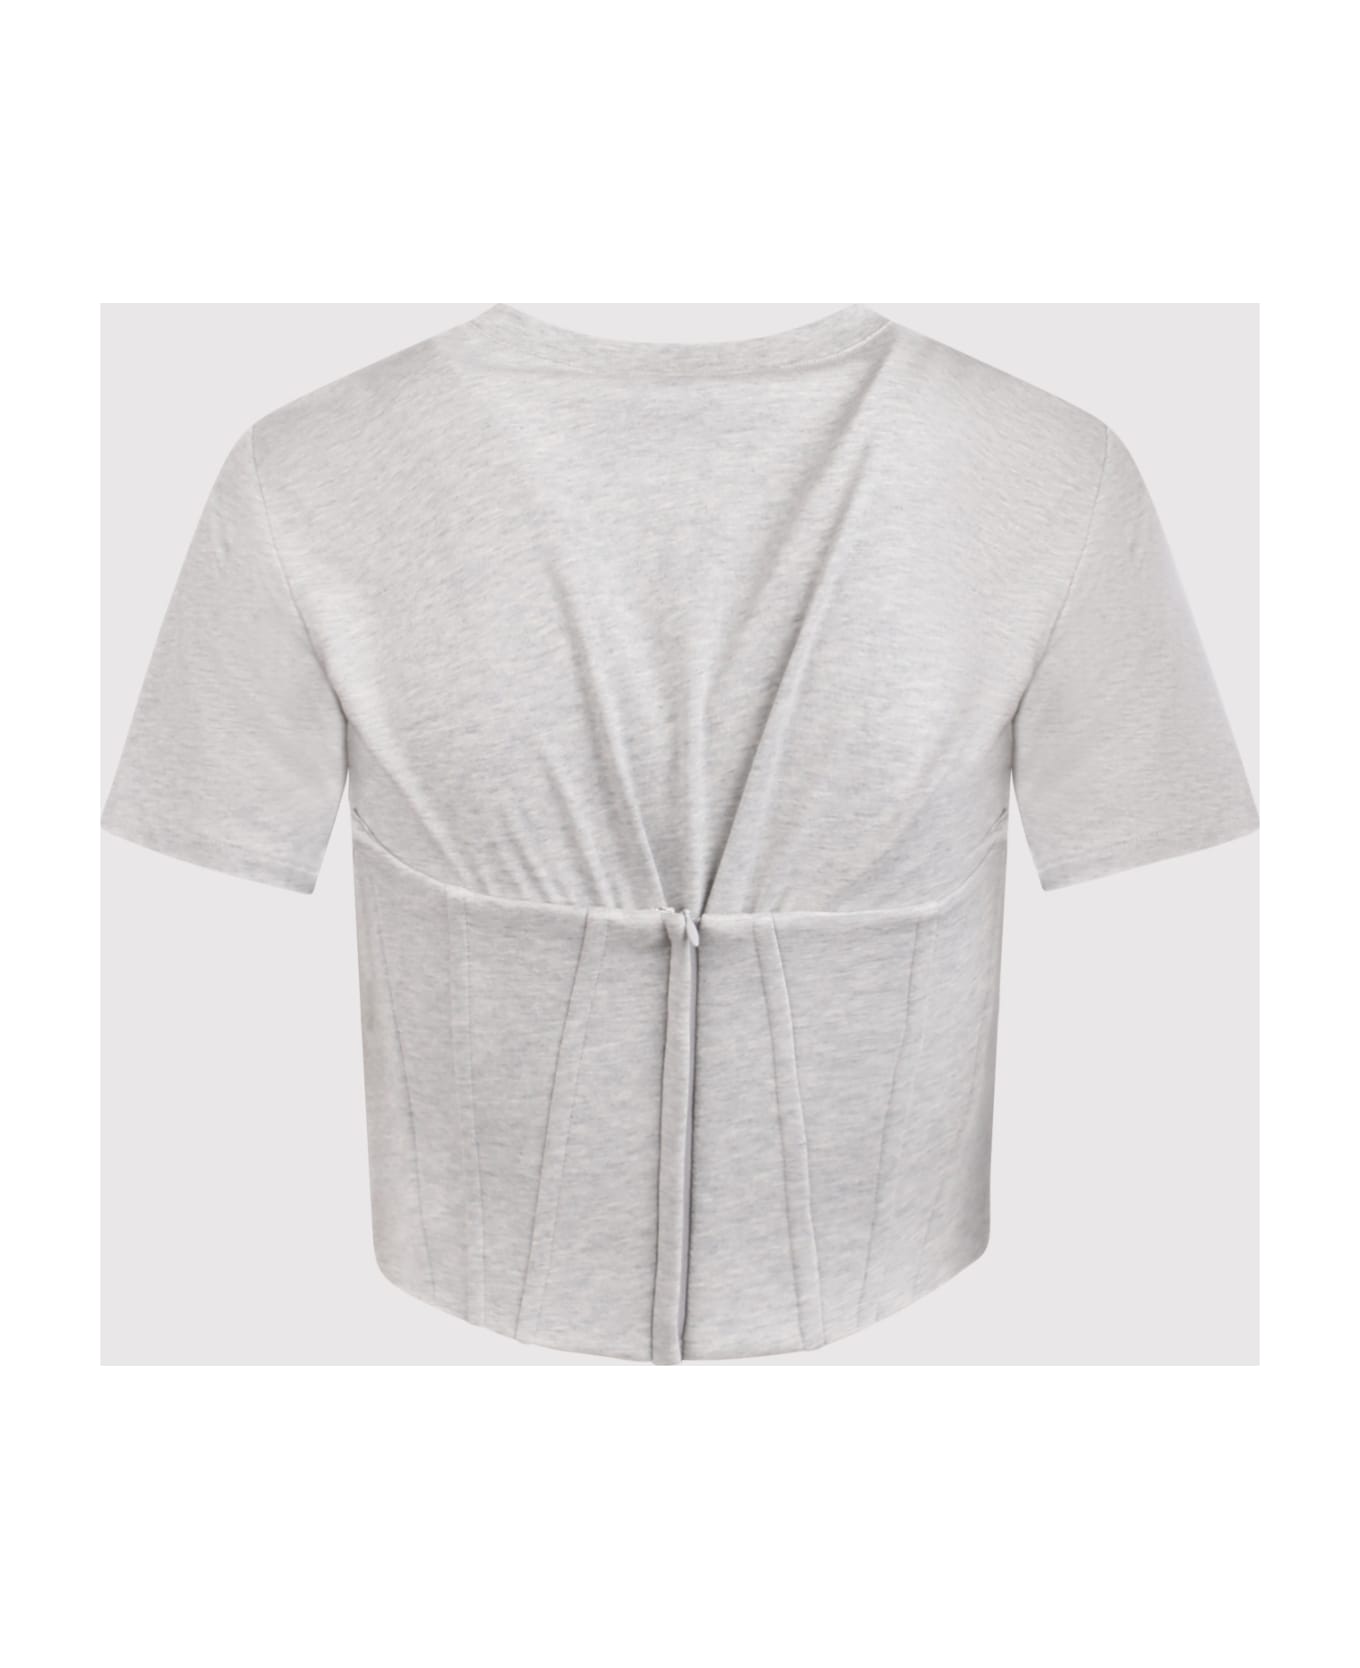 Giuseppe di Morabito T-shirt With Bustier Detail In Cotton Jersey